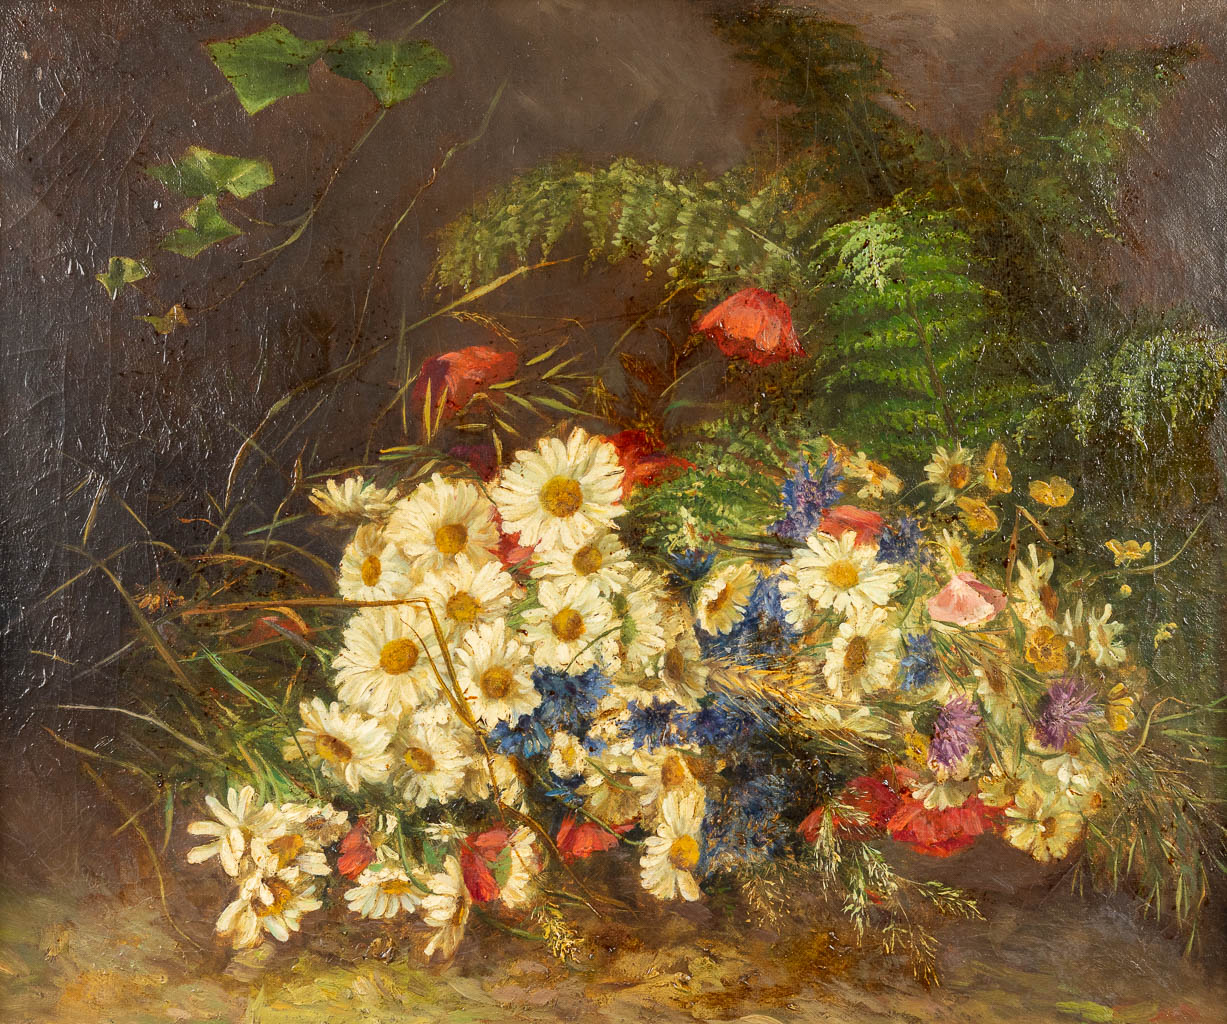 No signature found, a flower painting, oil on canvas. 20th century. (55 x 46 cm)